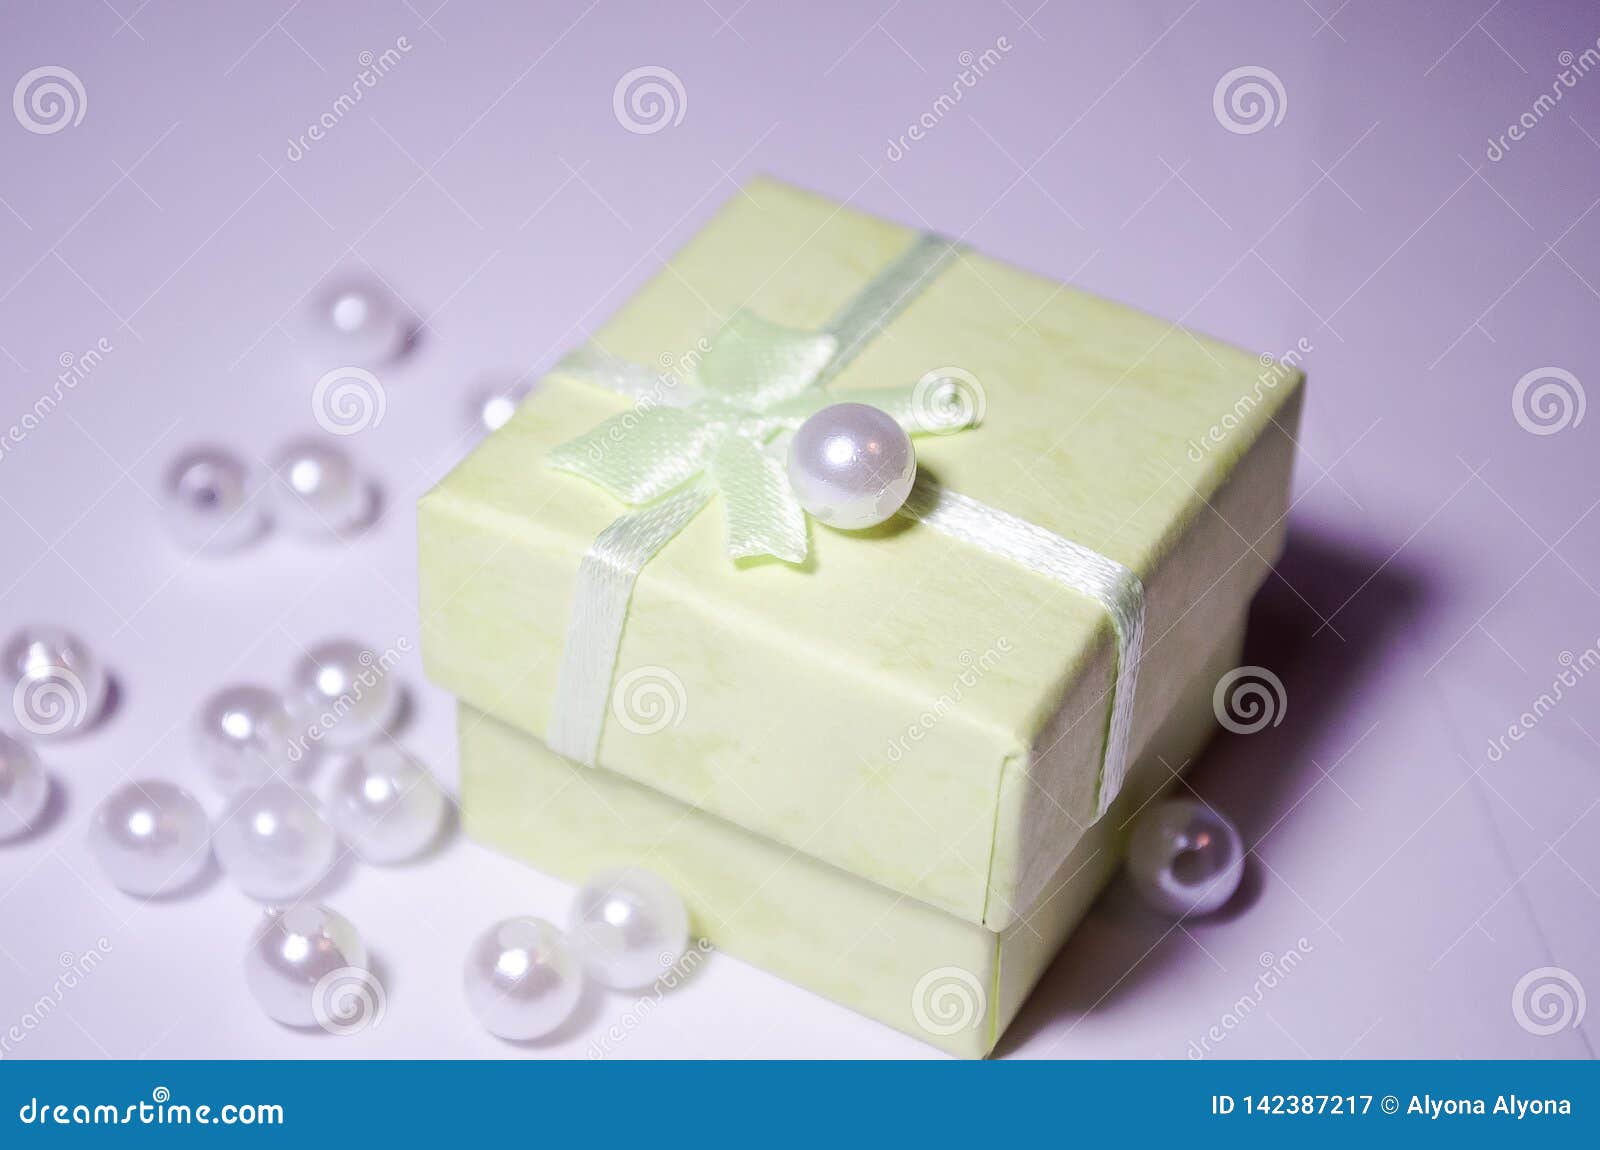 salatne box with a pearl. bead on the box. plastic bead. placer beads. white beads.